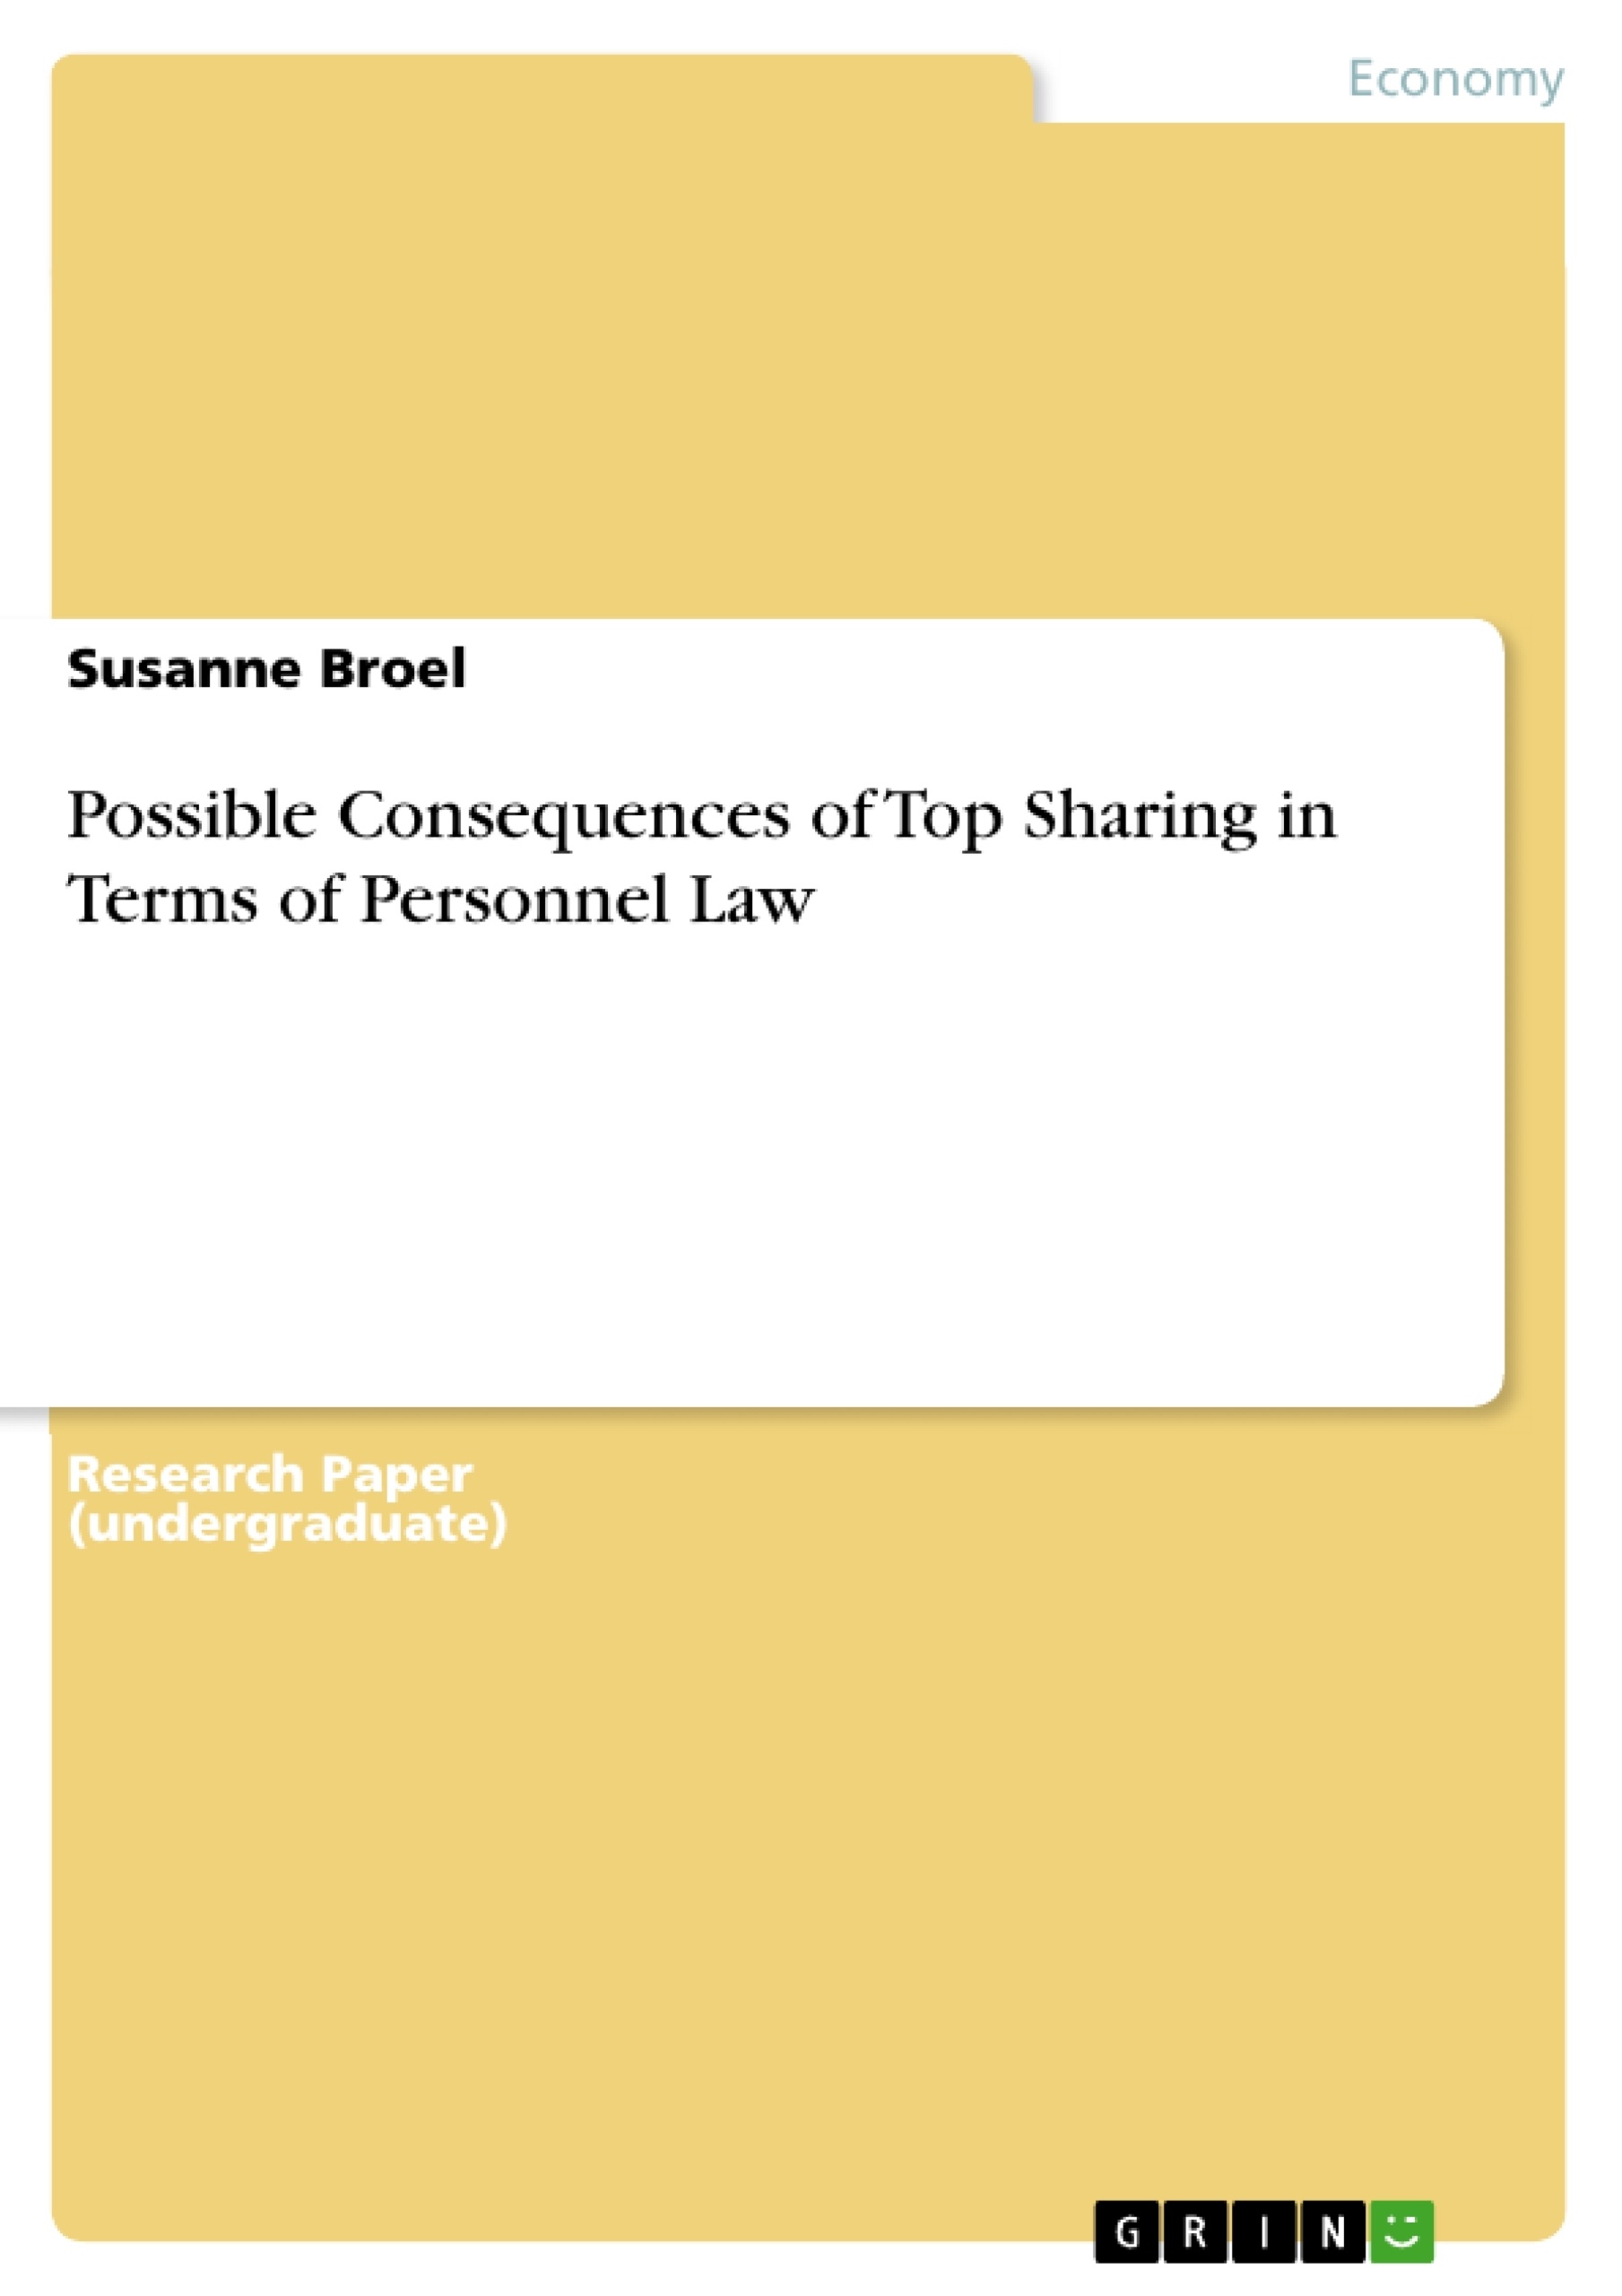 Title: Possible Consequences of Top Sharing in Terms of Personnel Law